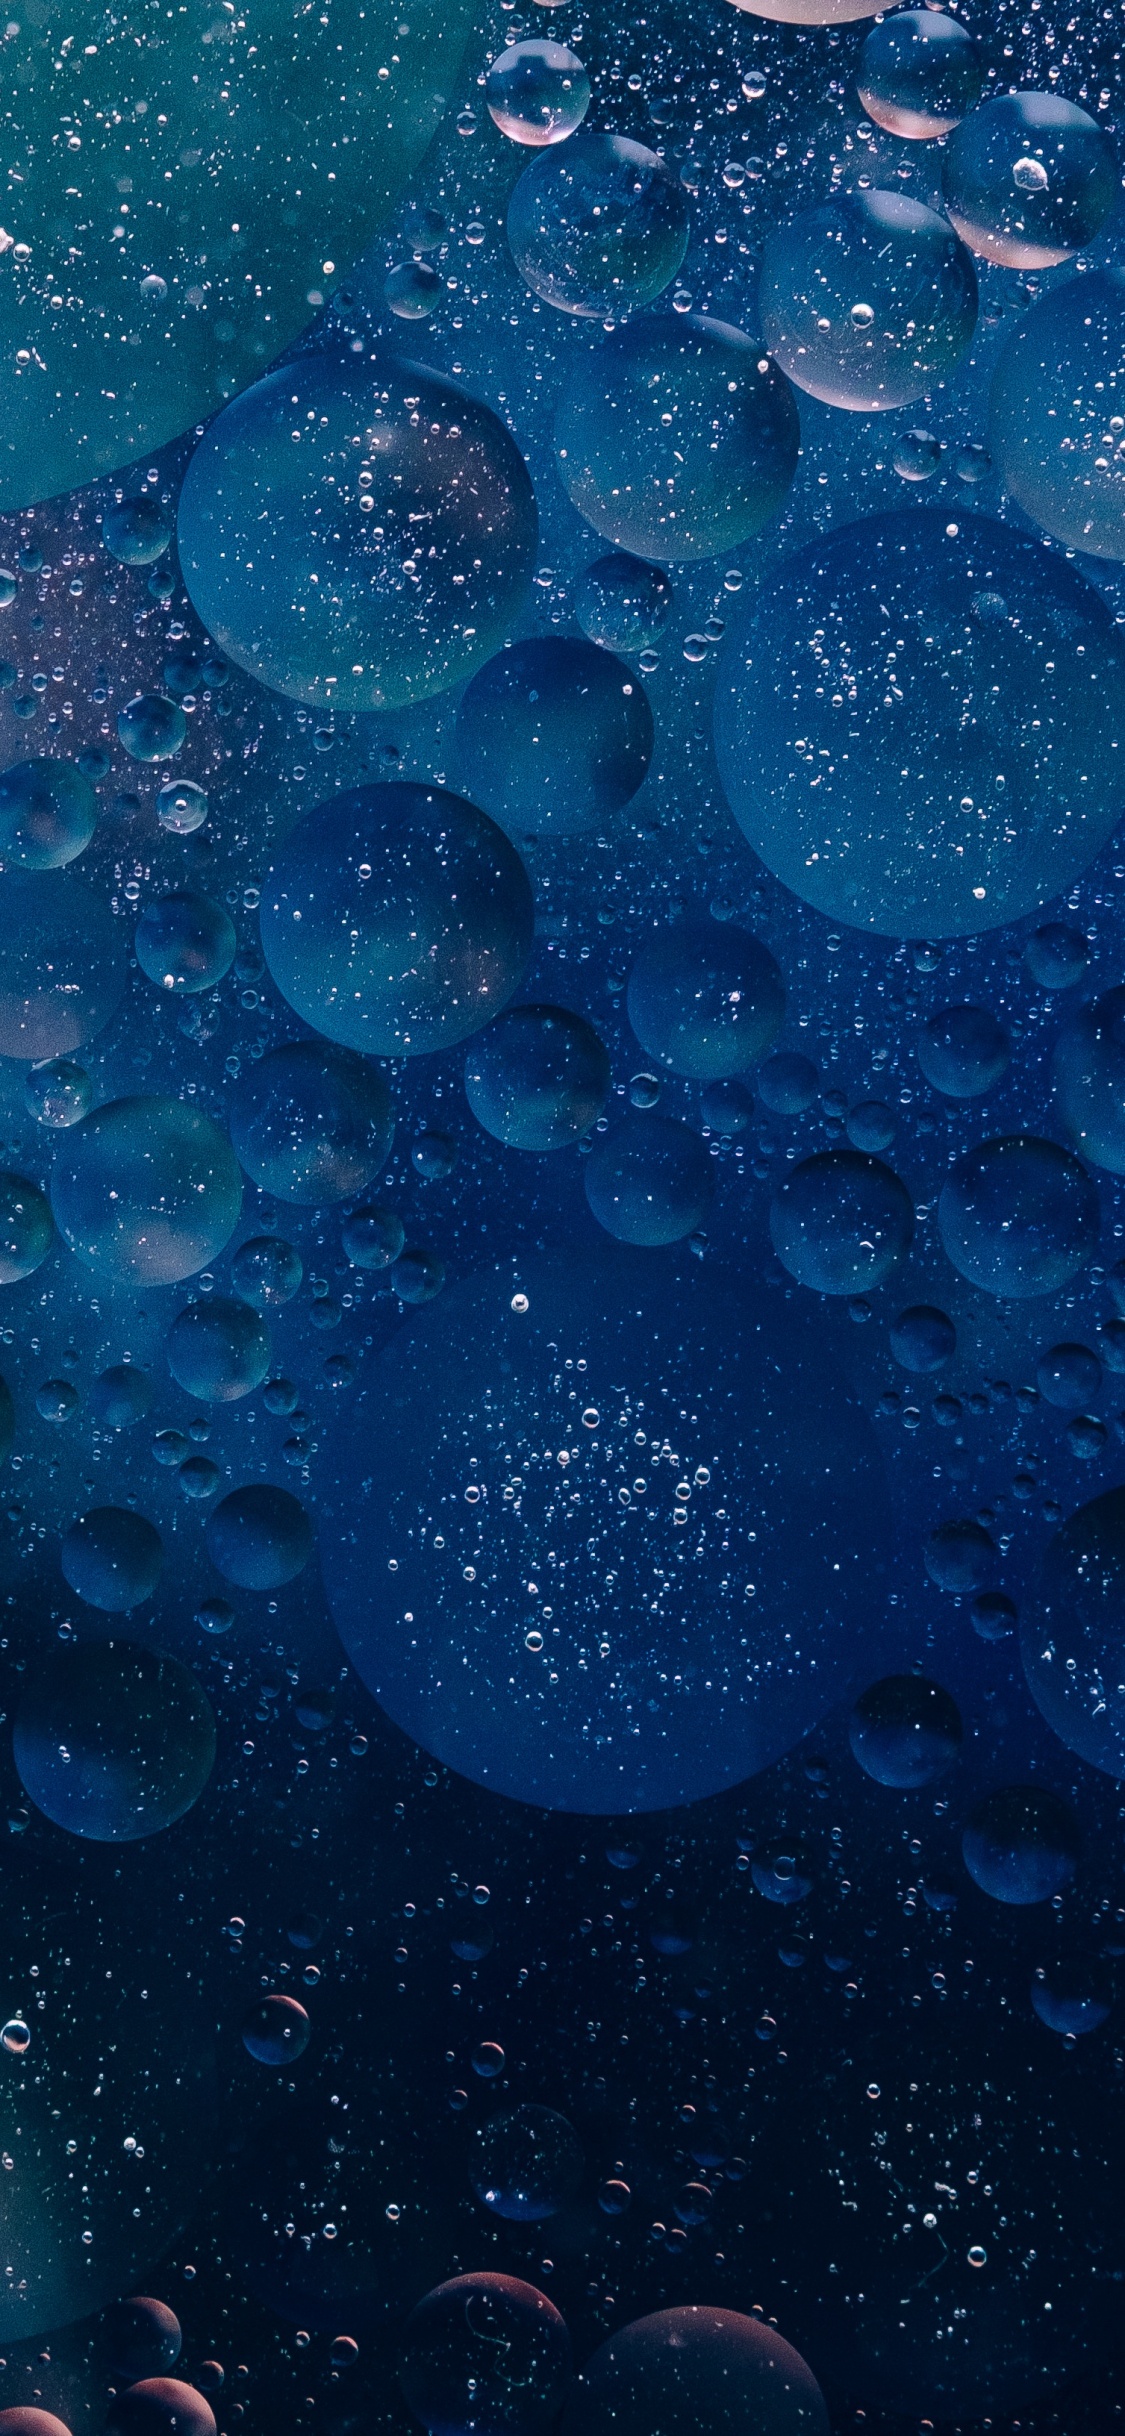 Water Droplets on Glass Panel. Wallpaper in 1125x2436 Resolution